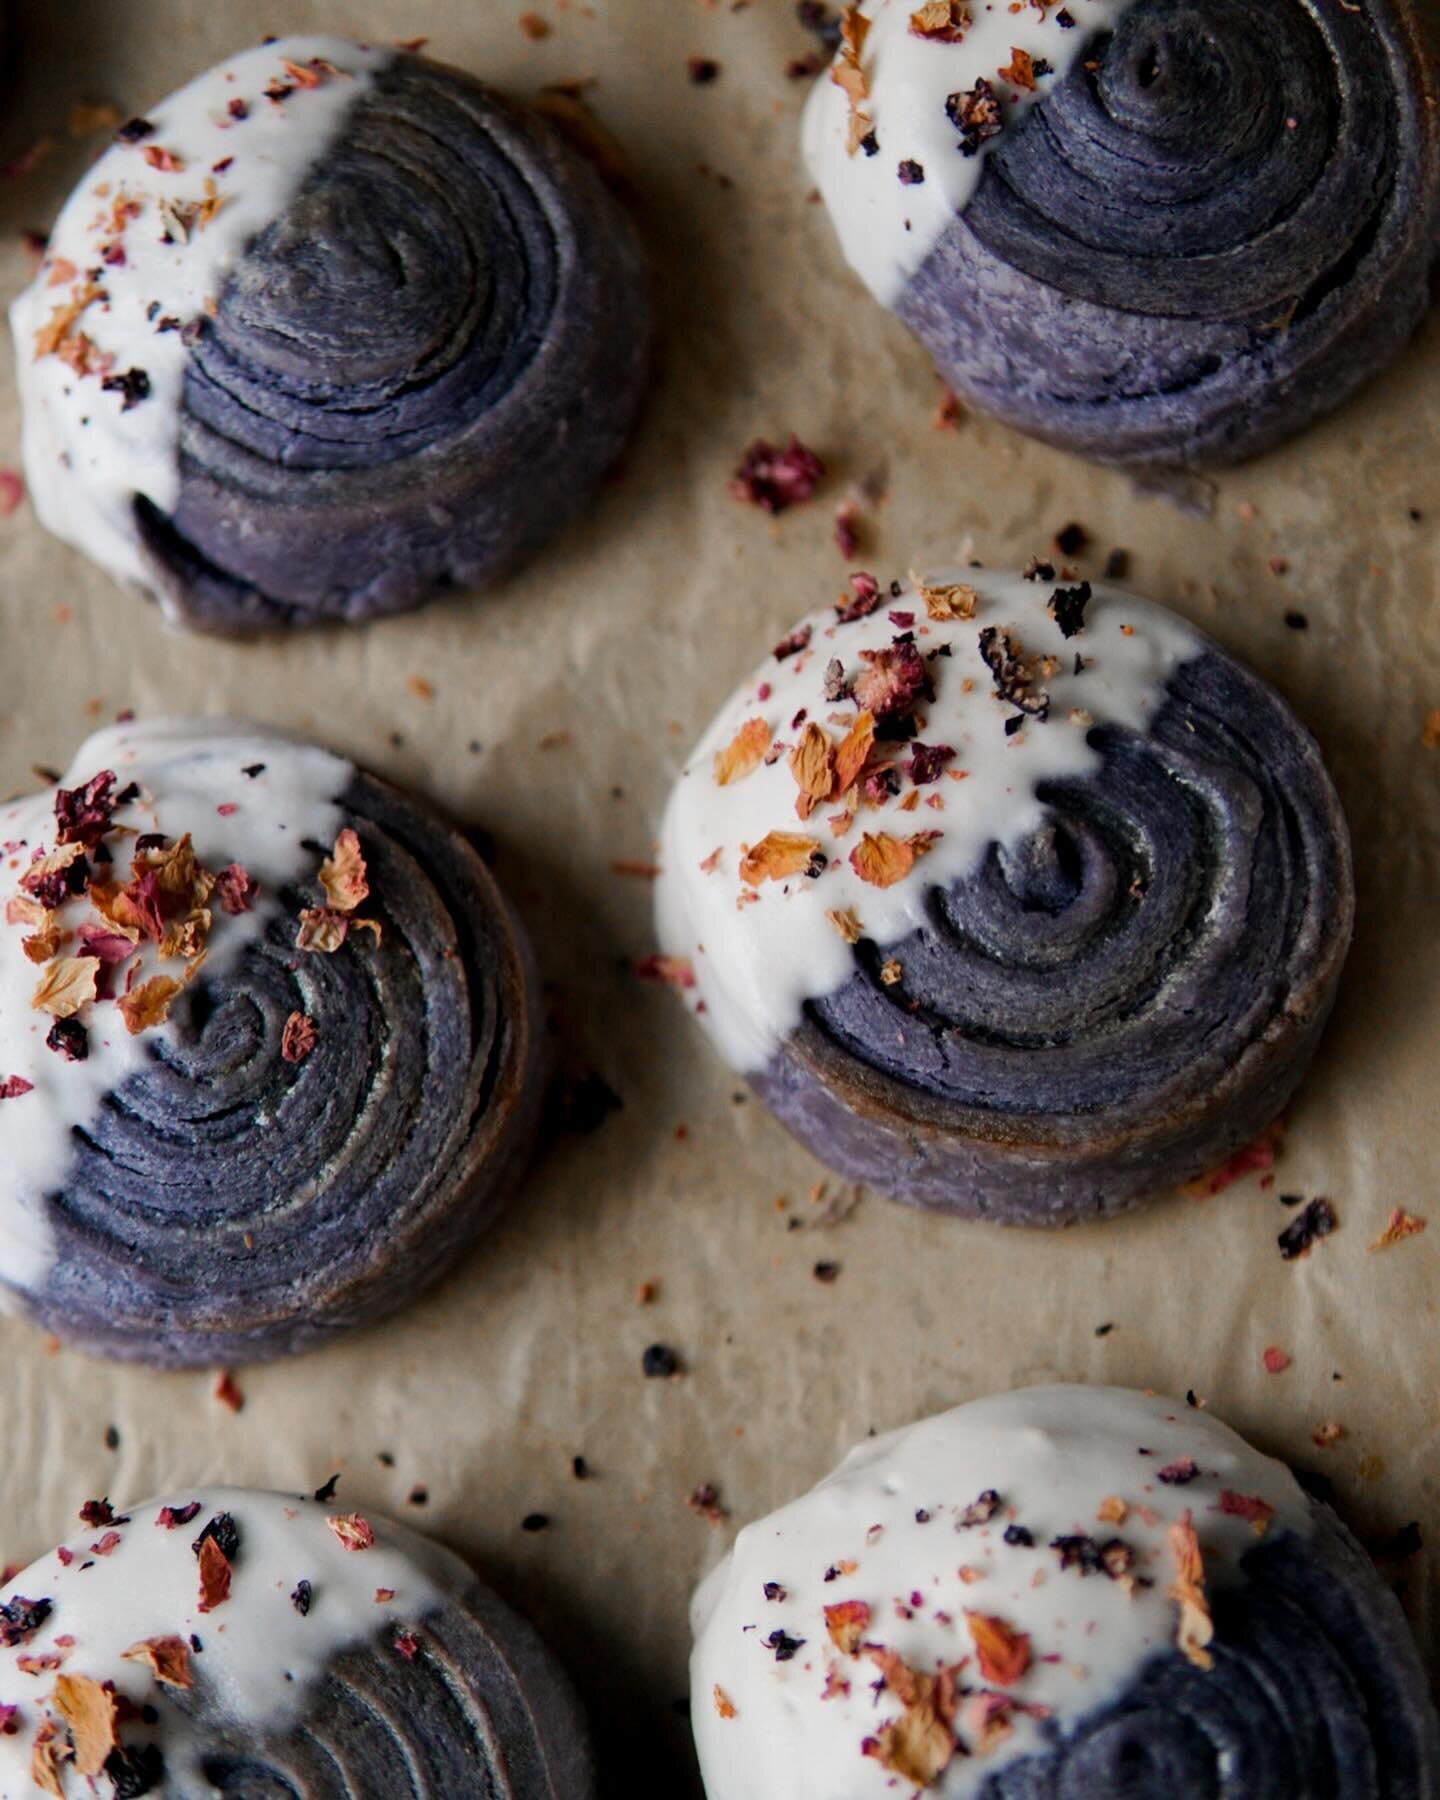 Spirals in nature (hey, Fibonacci), nature&rsquo;s pattern for the continual growth and evolution of everything. Spirals in our kitchen, a delightful ode to our own growth, and yours. 🌀

Butterfly pea spiral croissants dipped in coconut cream icing 